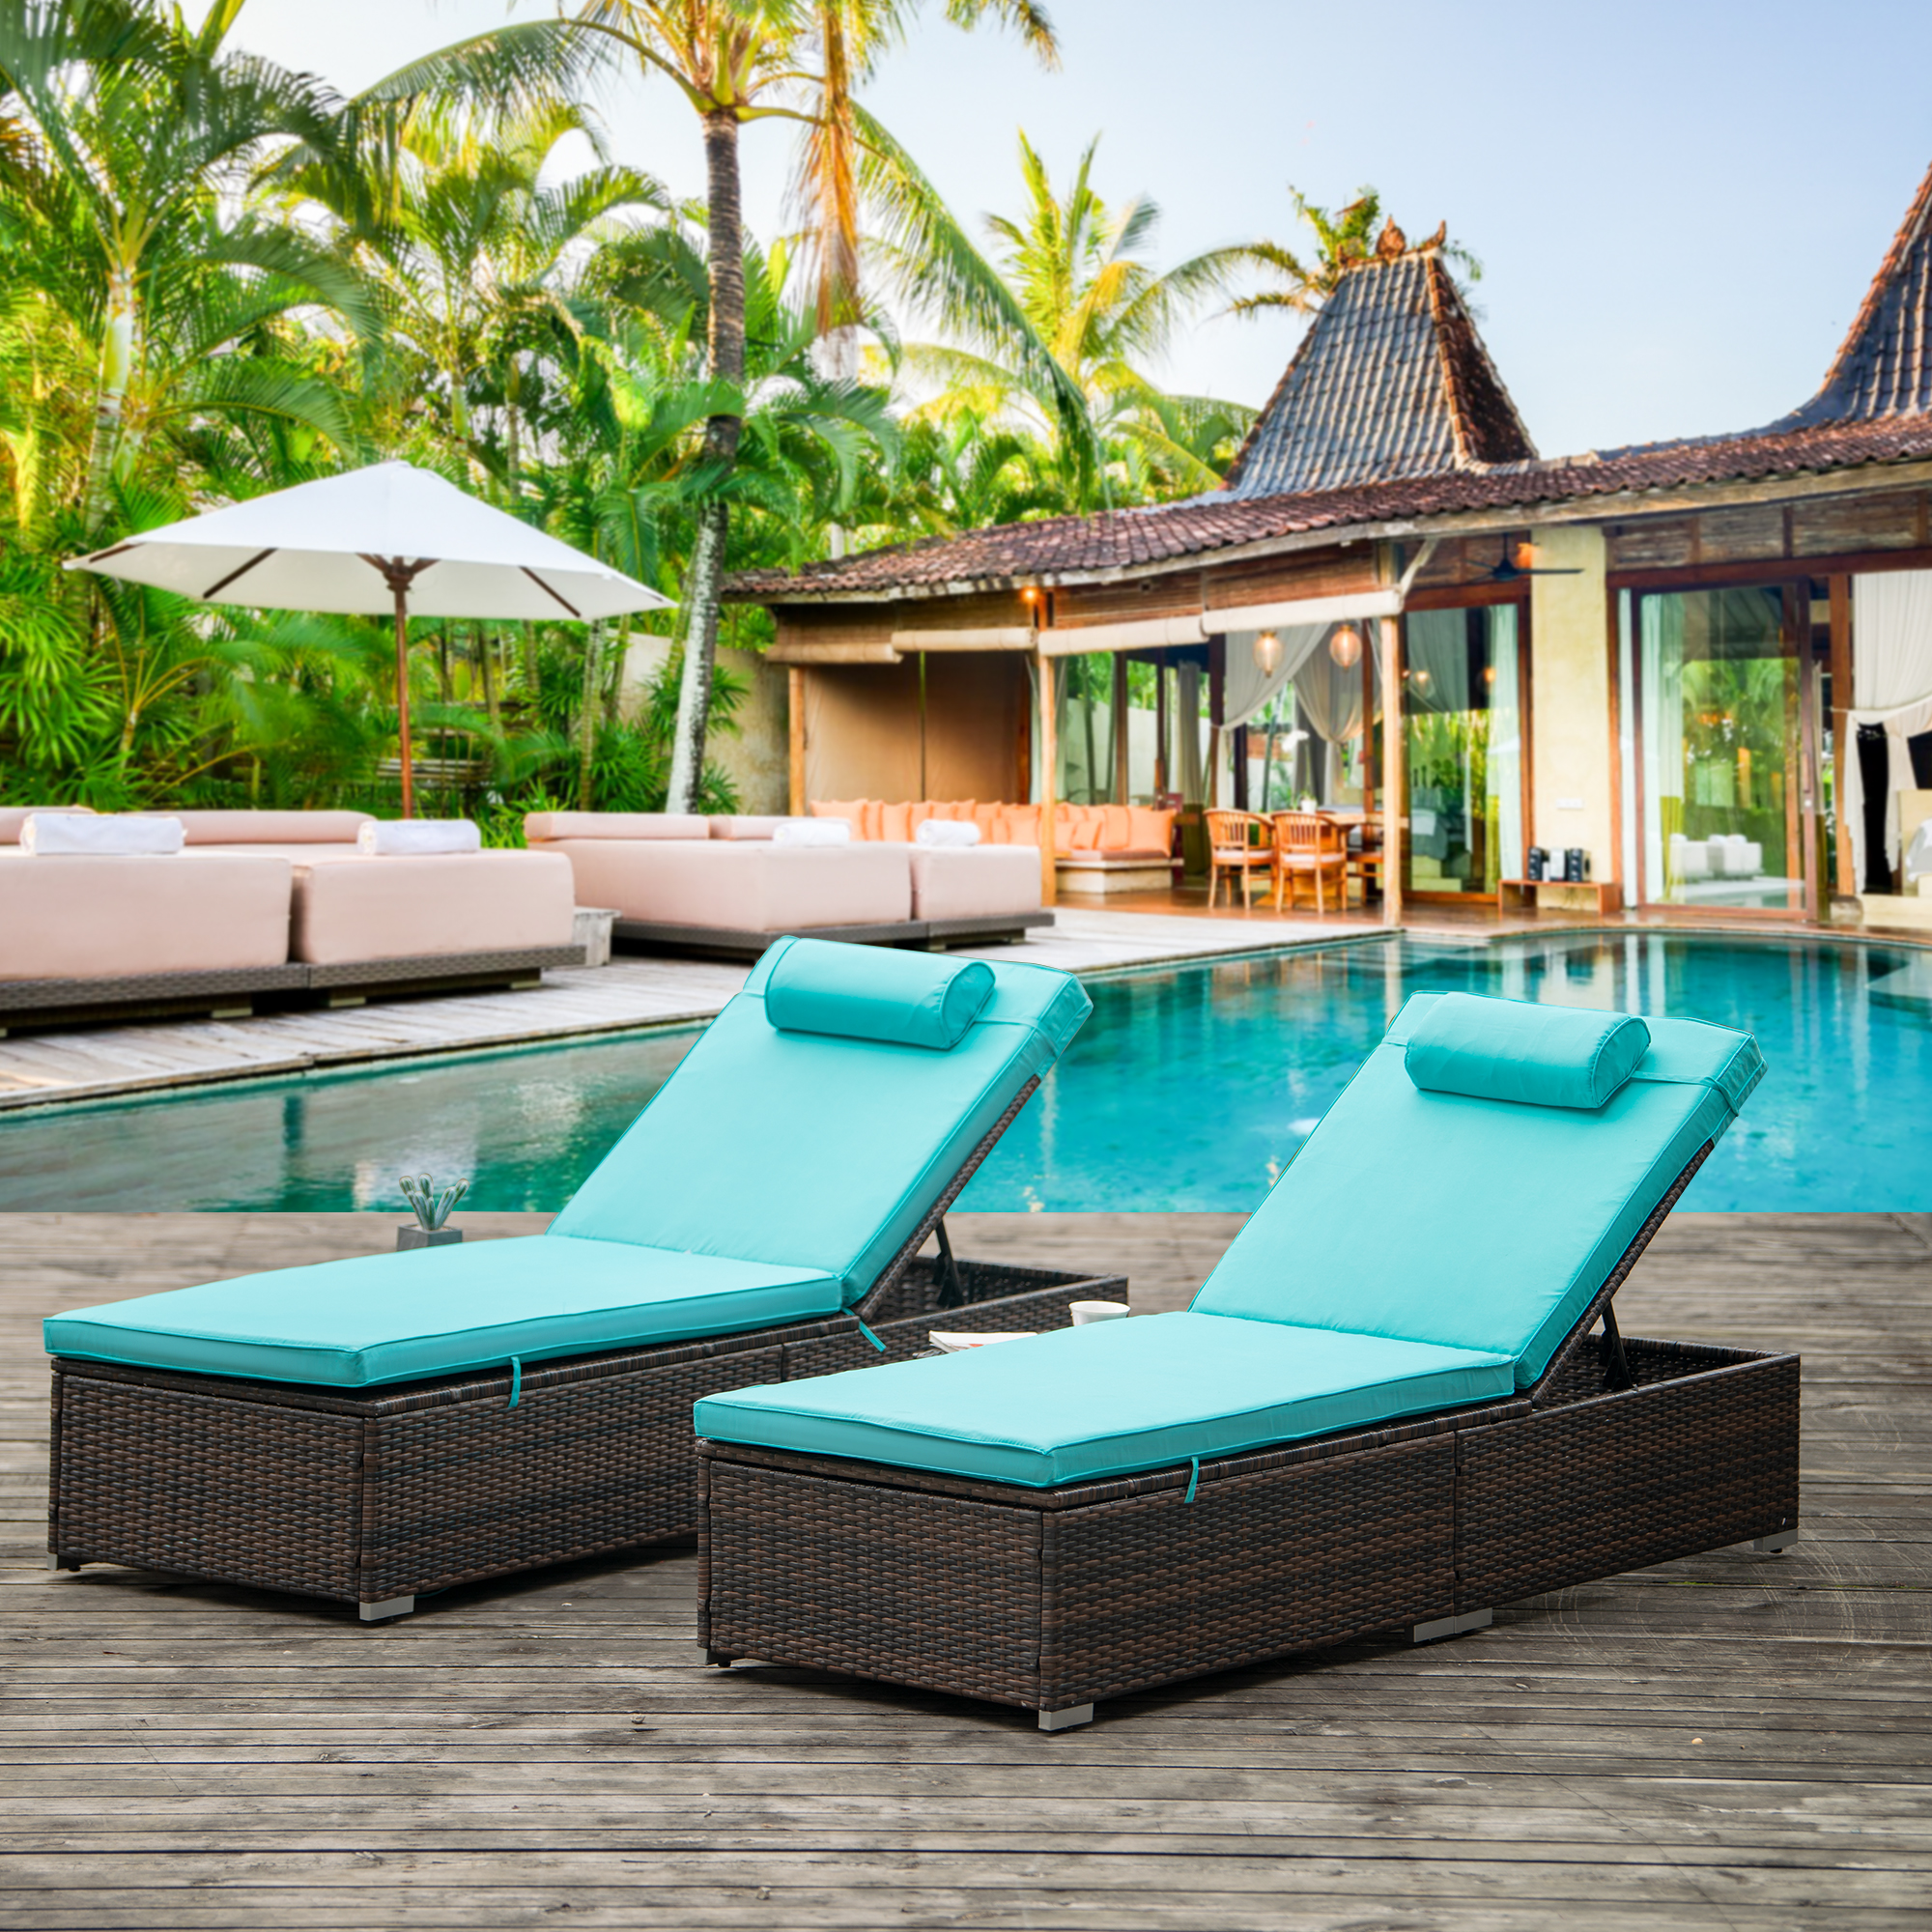 Patio Chaise Lounge 2 Sets with 5 Backrest Angles, Outdoor Single Adjustable Patio Wicker Lounge Chair with side Storage Shelf for Poolside Backyard Deck Porch Garden - image 1 of 7